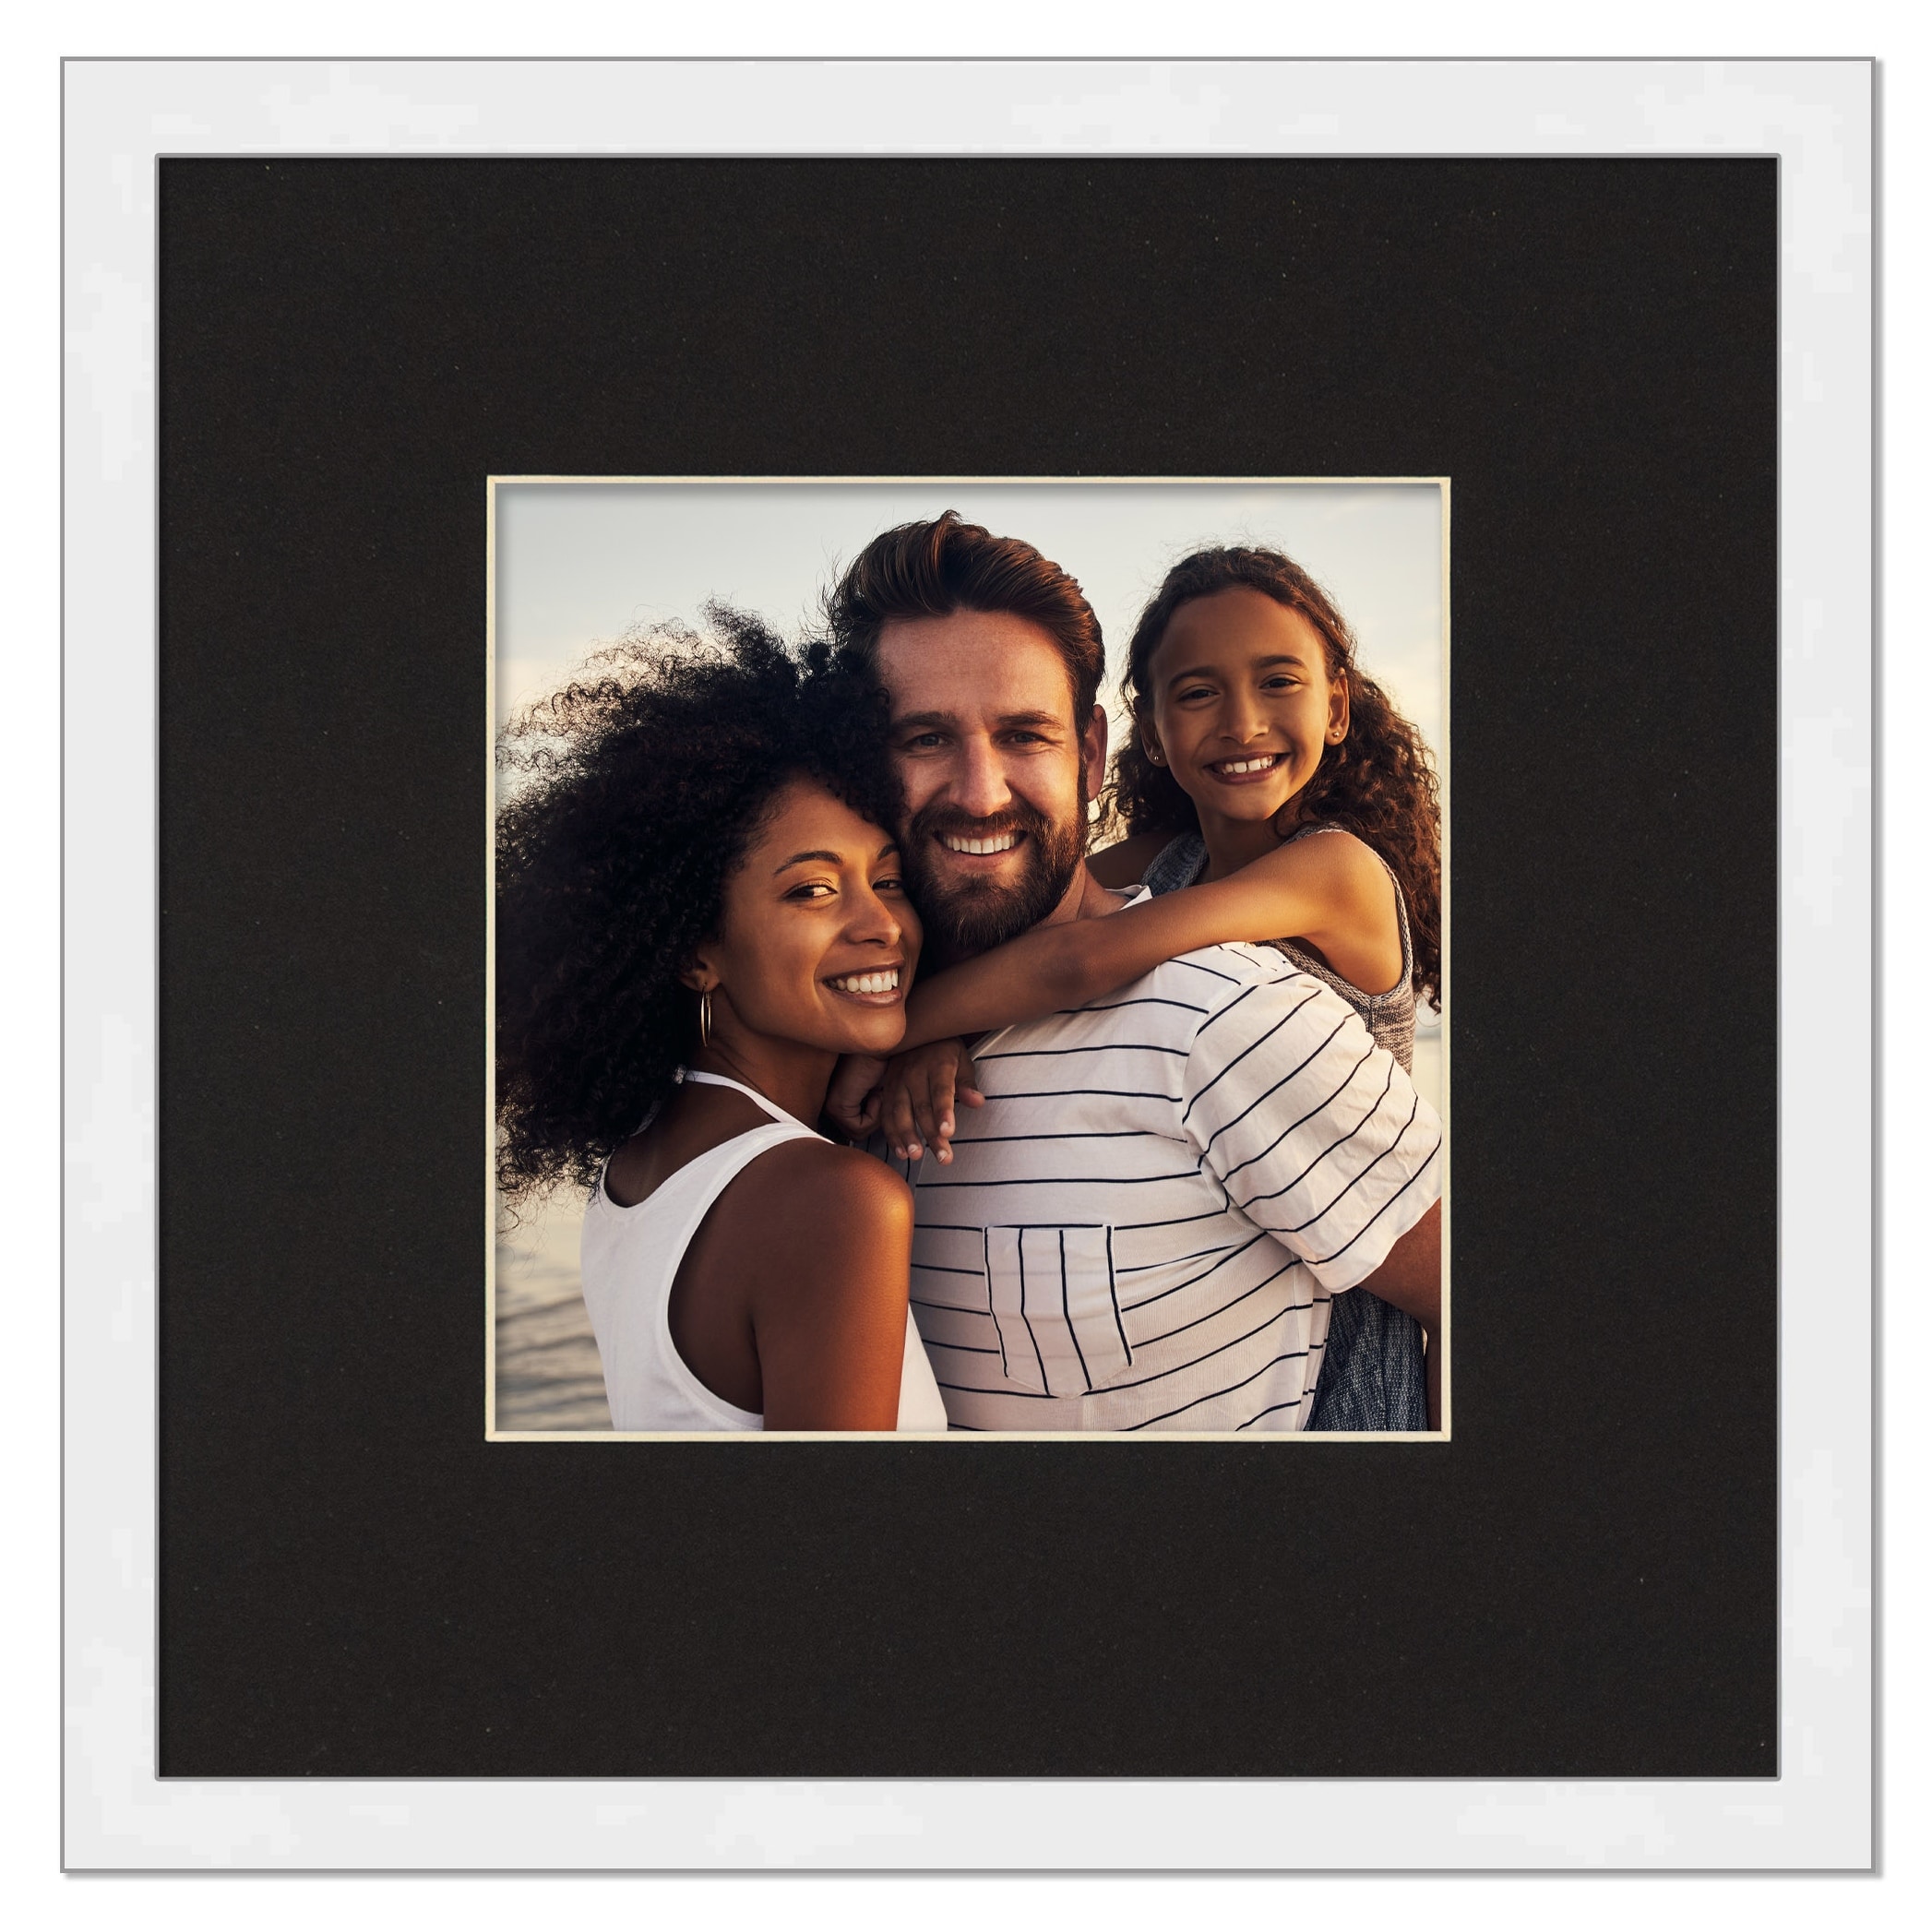 8x8 Frame with Mat - White 11x11 Frame Wood Made to Display Print